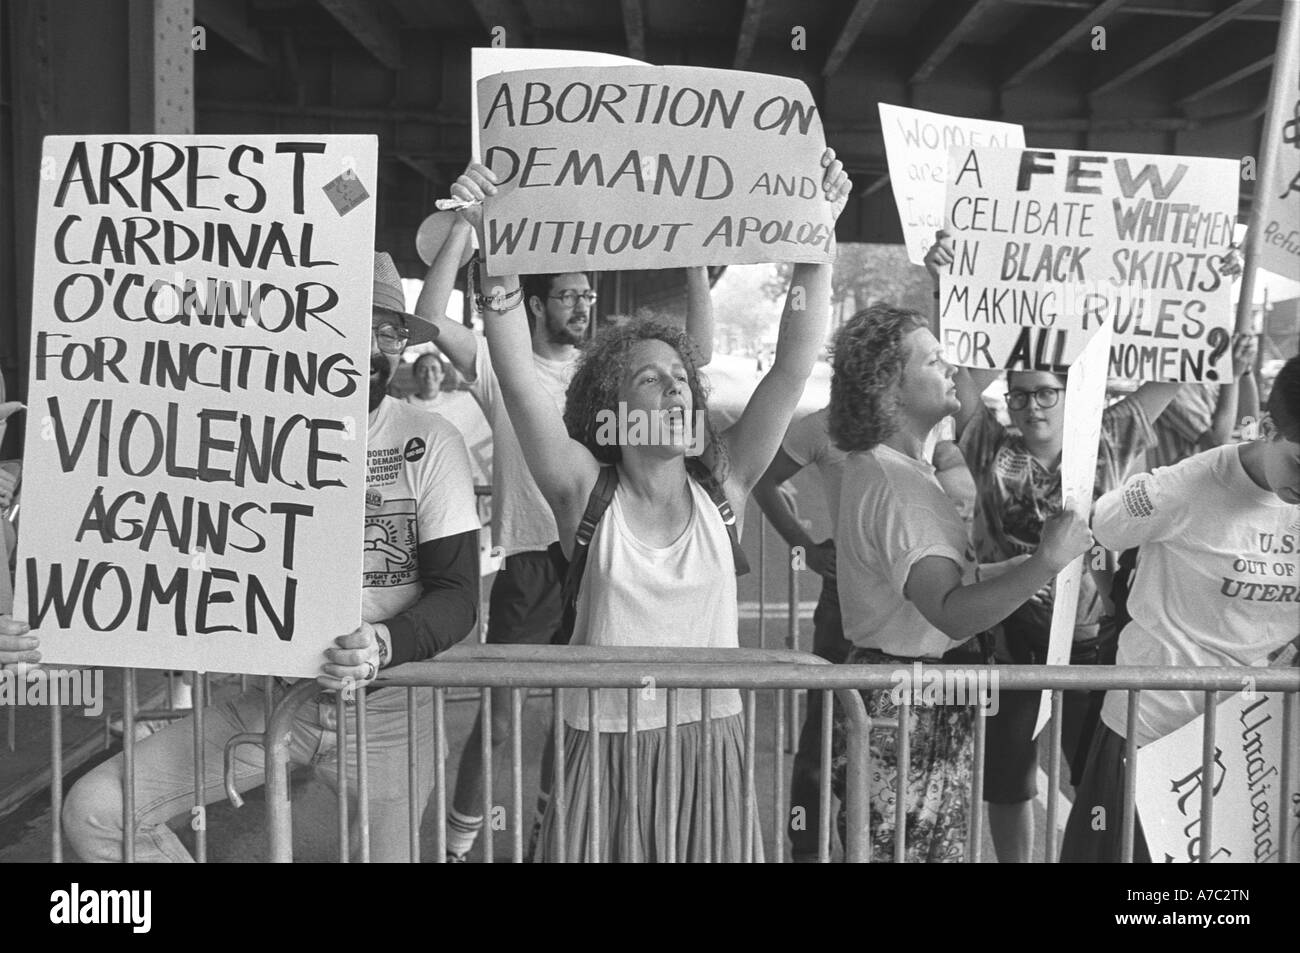 Pro choice women demonstrate for a woman's right to choose in Brooklyn New York Stock Photo